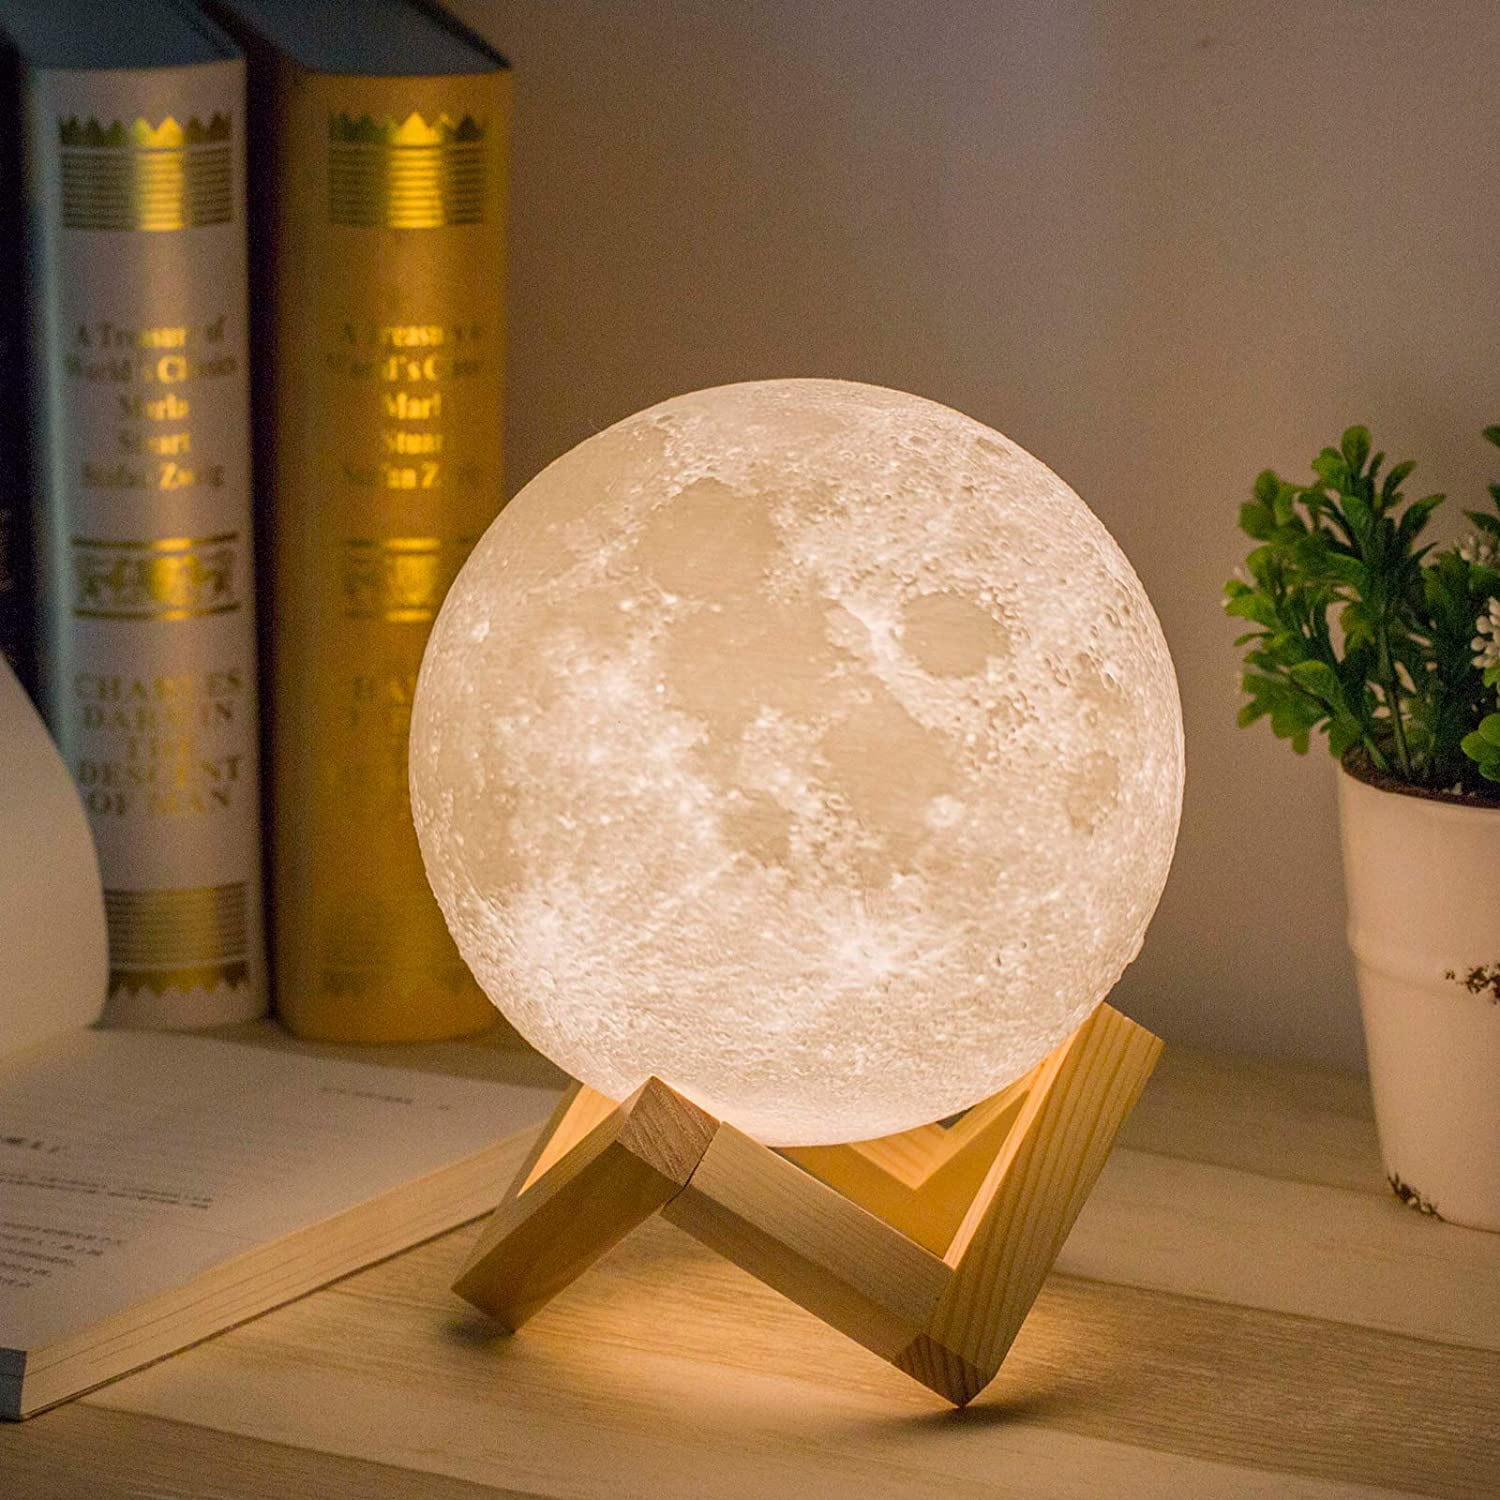 3D Moon Night Light Table Lamp USB Charging Touch Control Home Decor Gift 8-20cm 